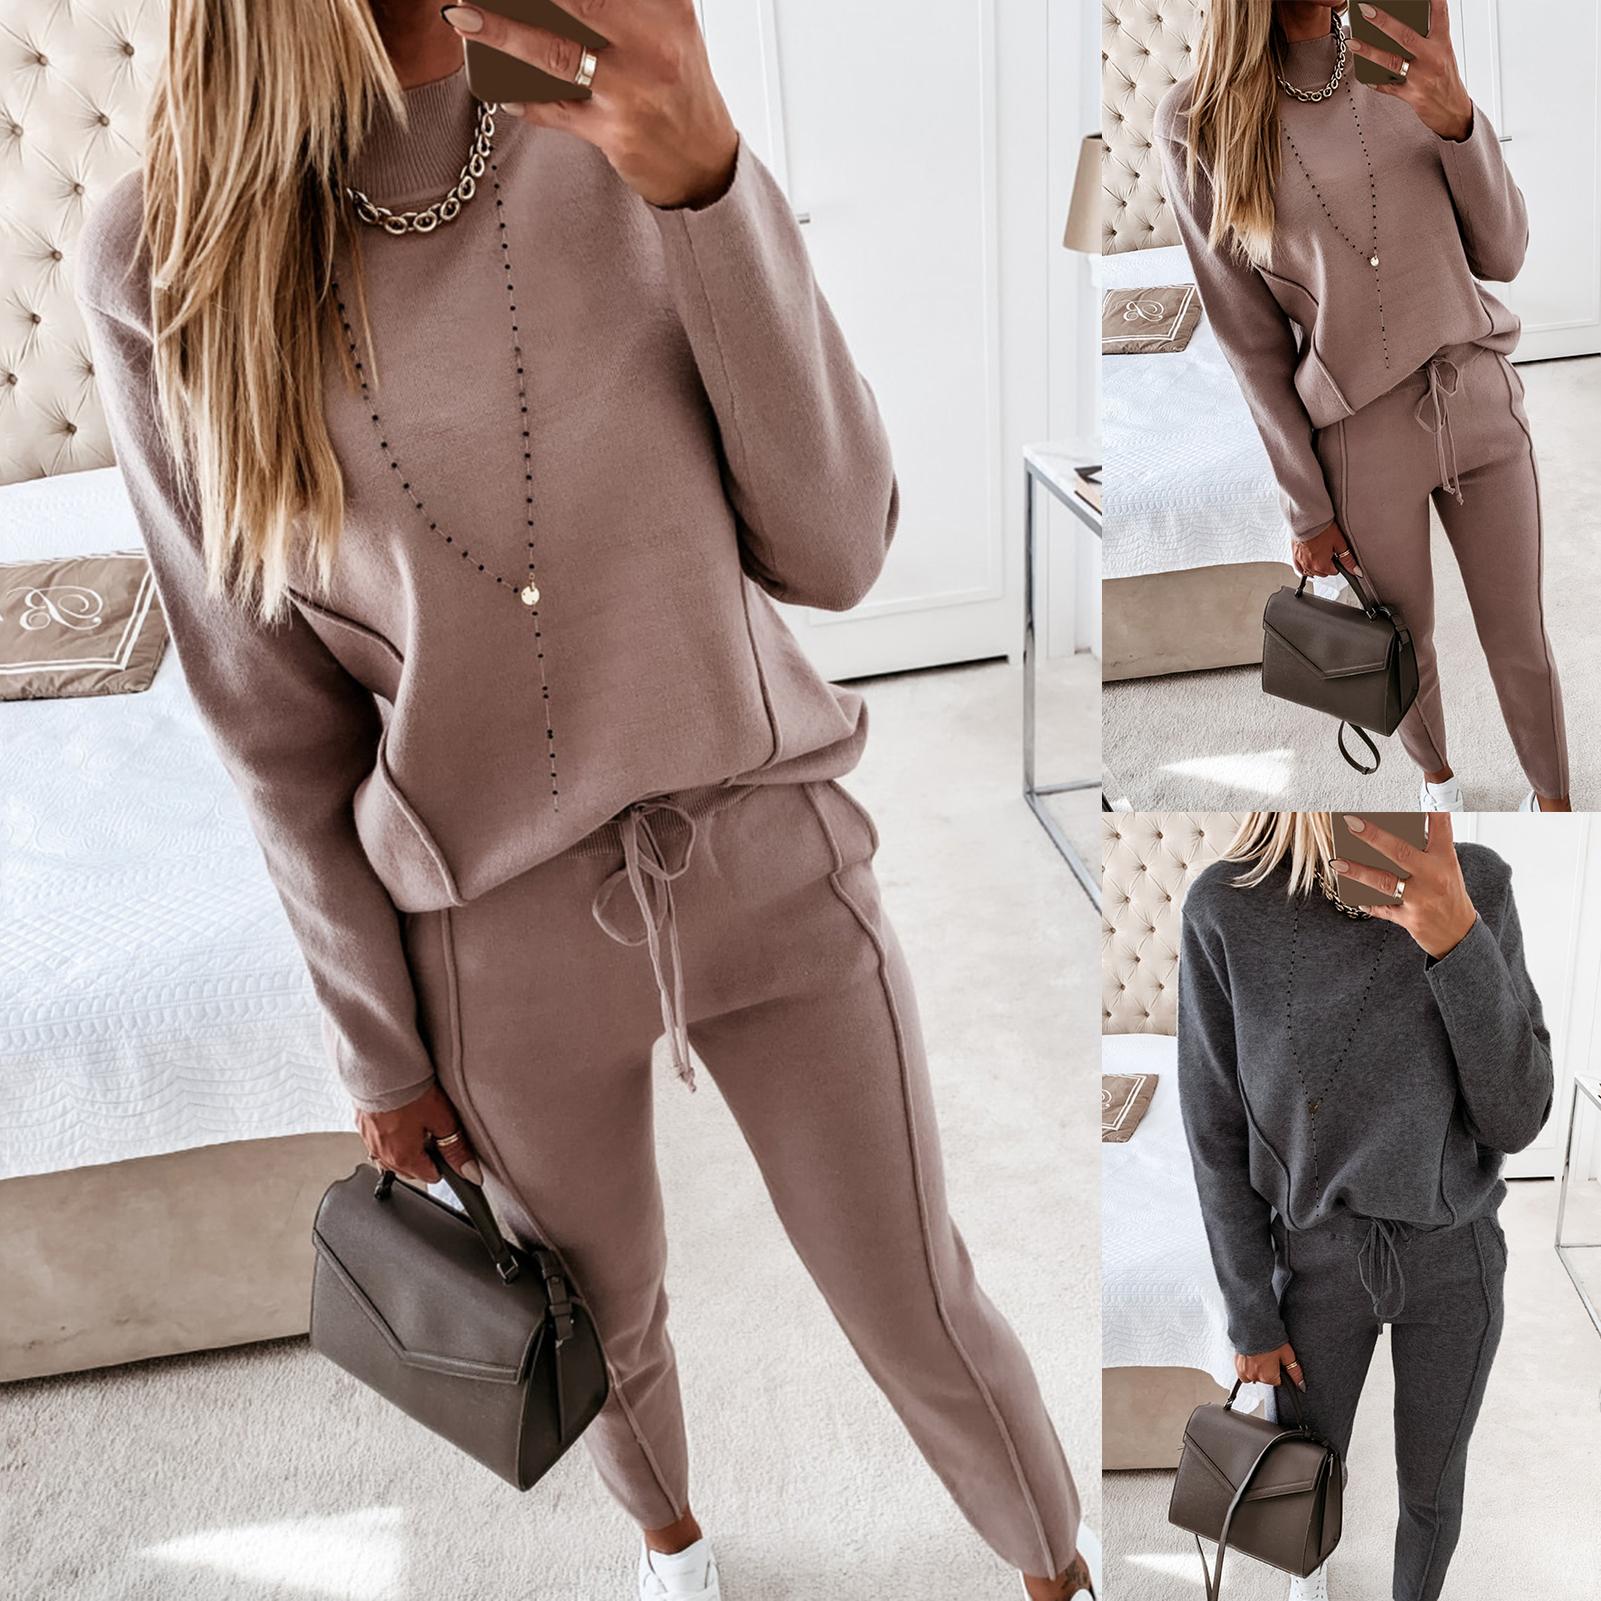 Traveler Tracksuit(O-Neck Pullover, Drawstring Pants) - Linions